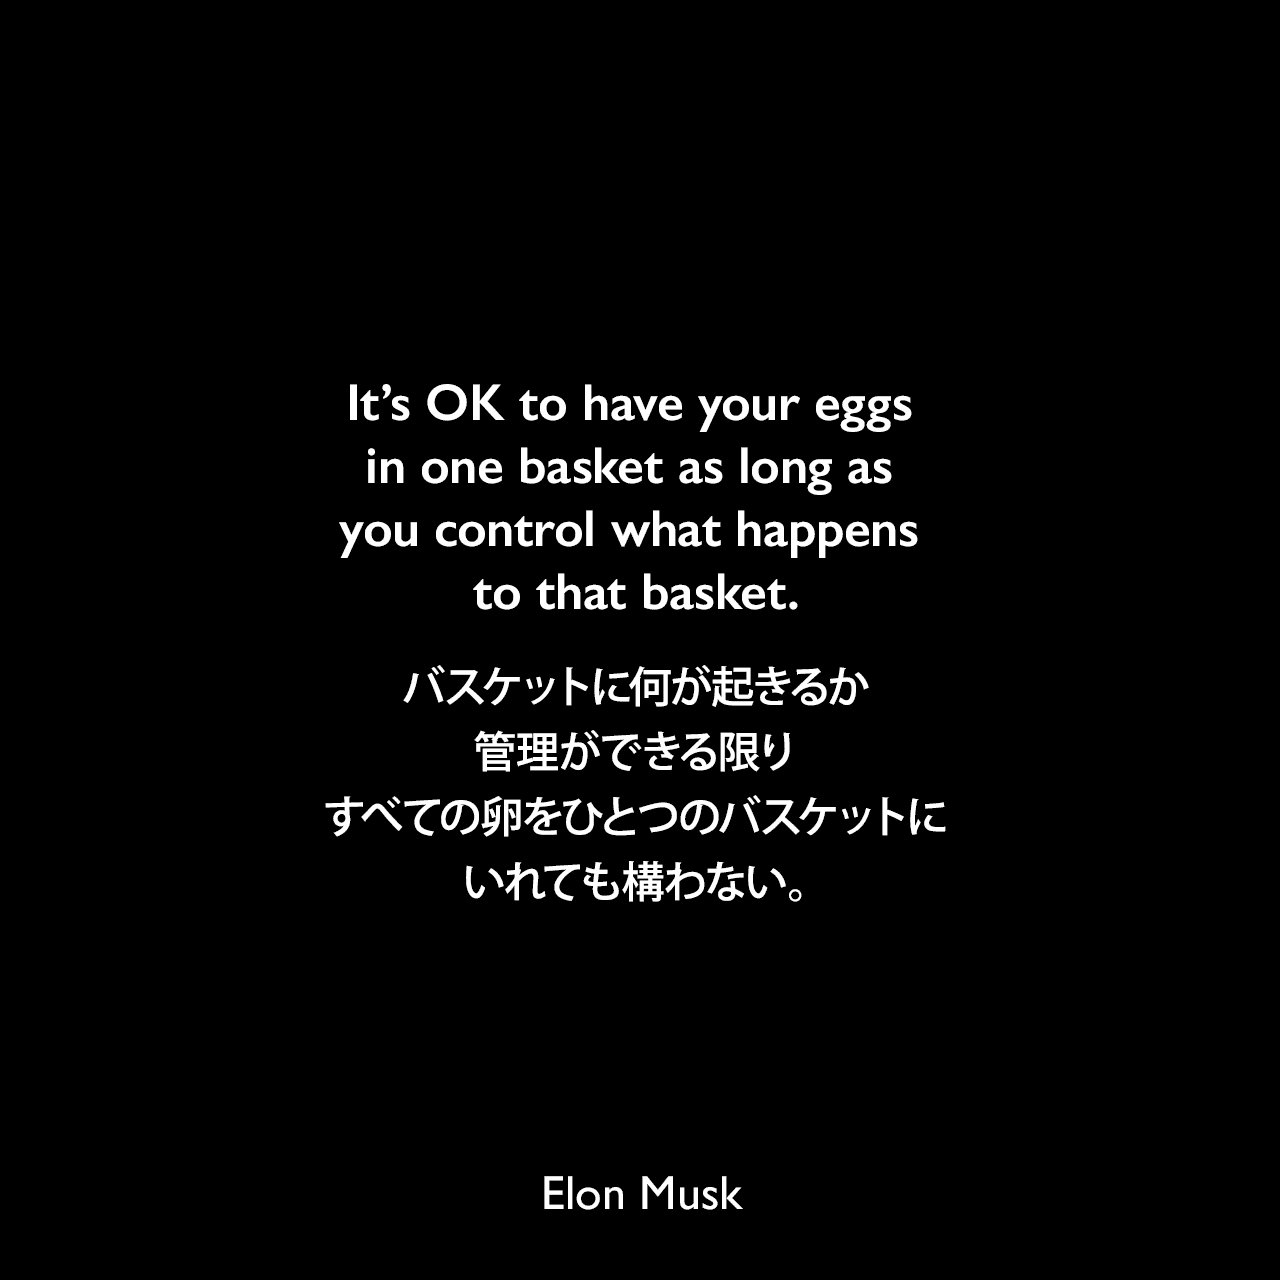 It’s OK to have your eggs in one basket as long as you control what happens to that basket.バスケットに何が起きるか管理ができる限り、すべての卵をひとつのバスケットにいれても構わない。Elon Musk